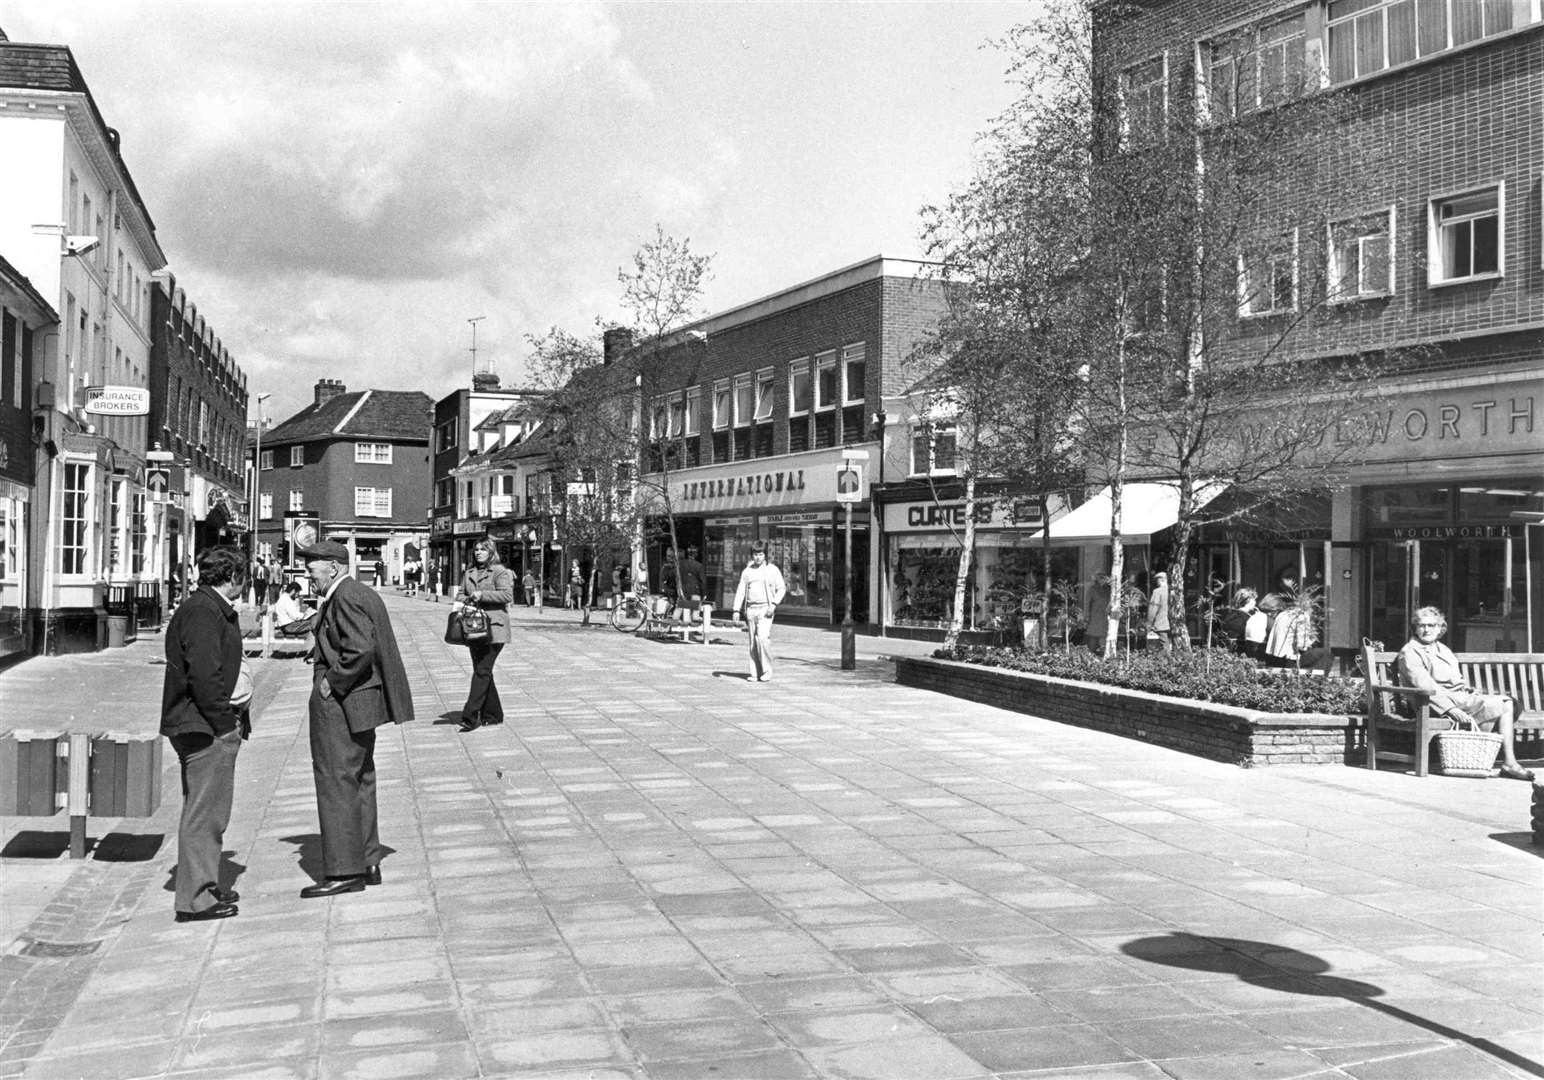 The Upper High Street in Ashford was home to the International Stores supermarket, a popular destination for shoppers when this 1977 shot was taken. But it was demolished to create the entrance to the Park Mall shopping centre. Picture: Images of Ashford by Mike Bennett